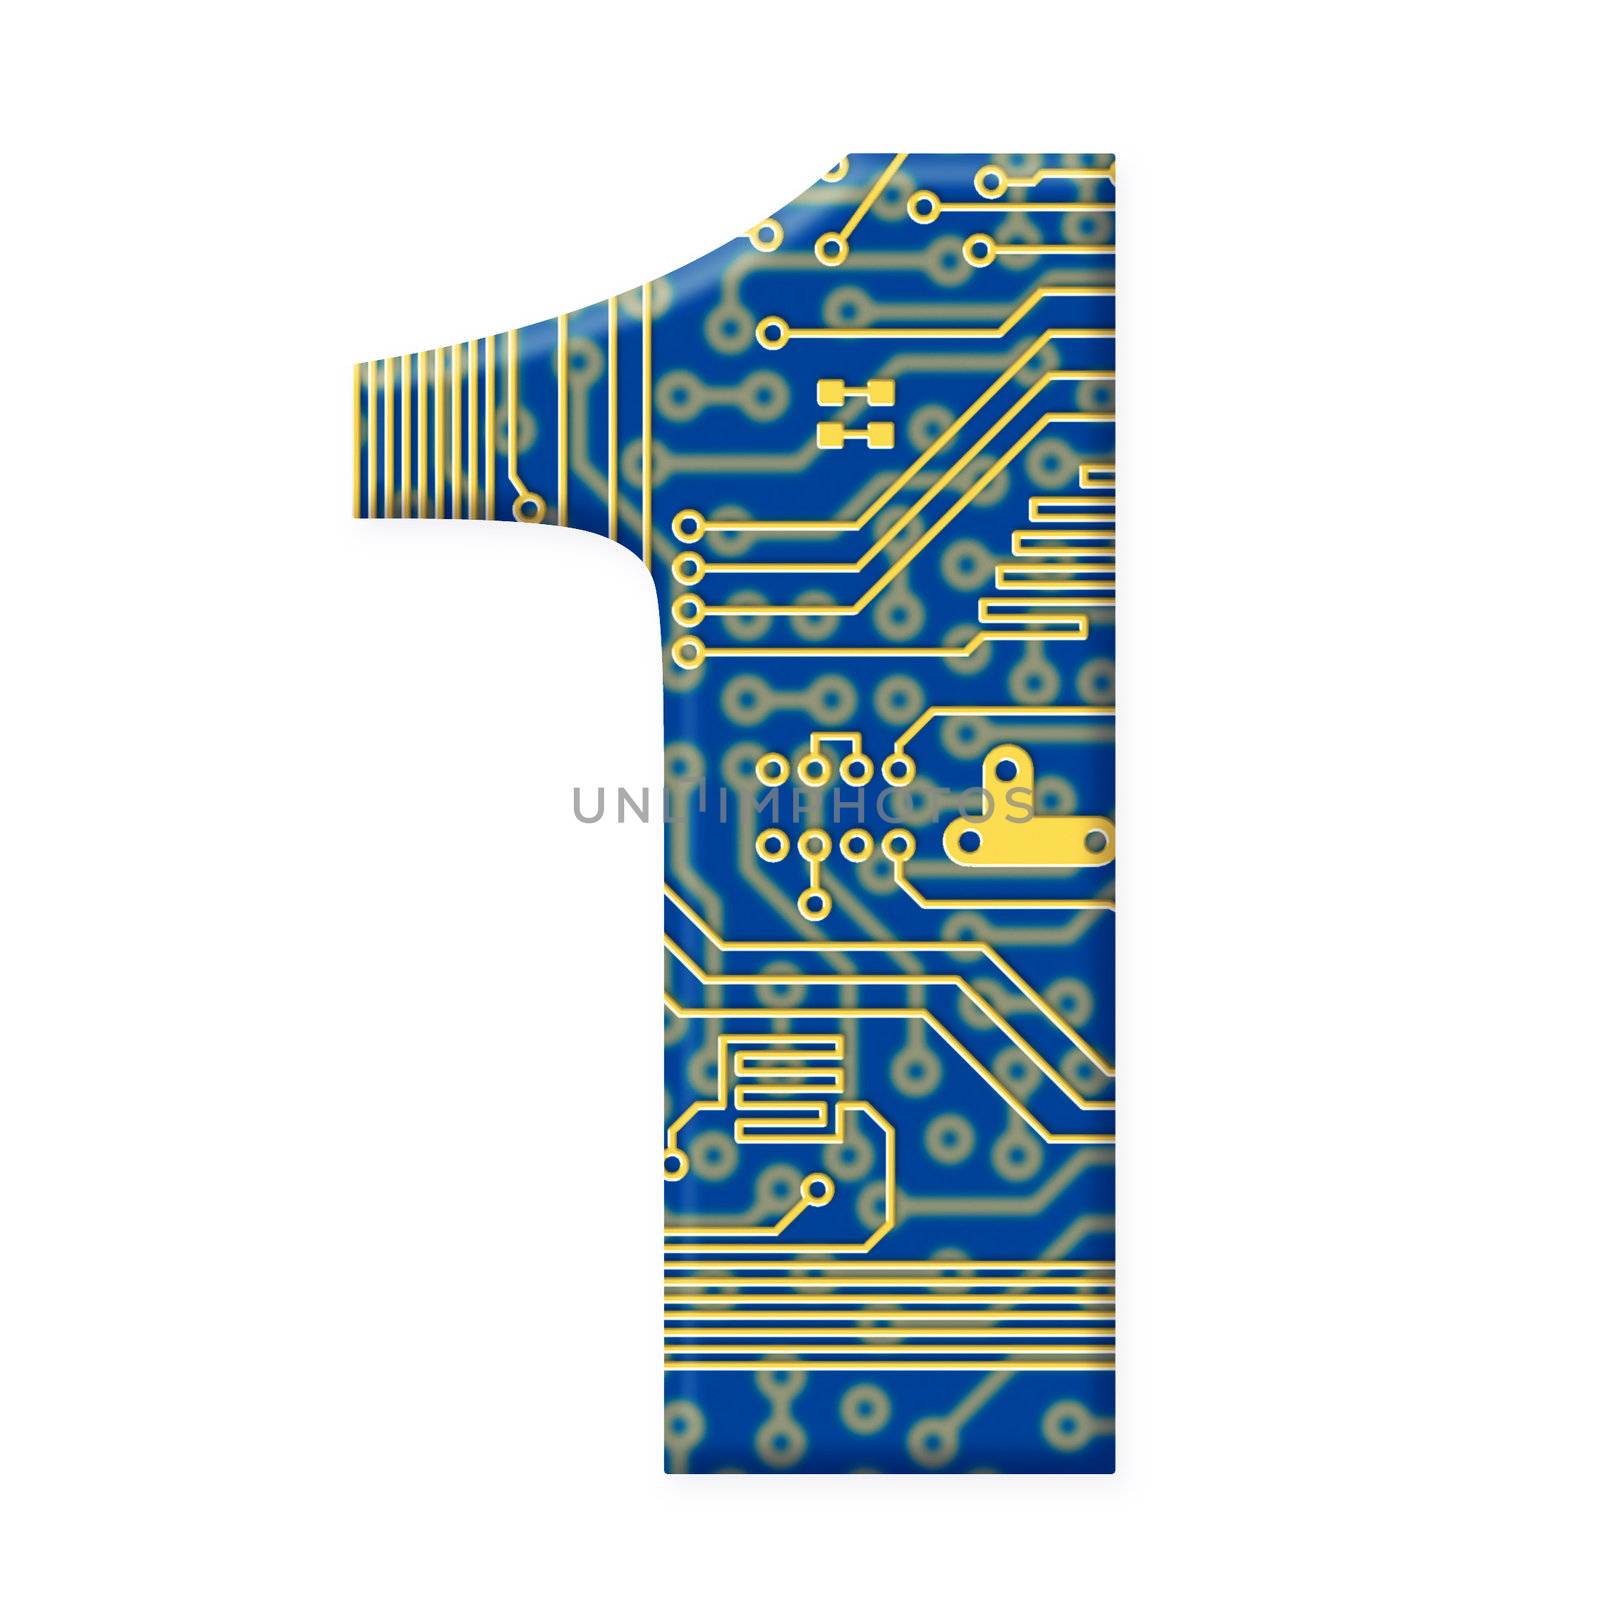 Digit from electronic circuit board alphabet on white background by pzaxe